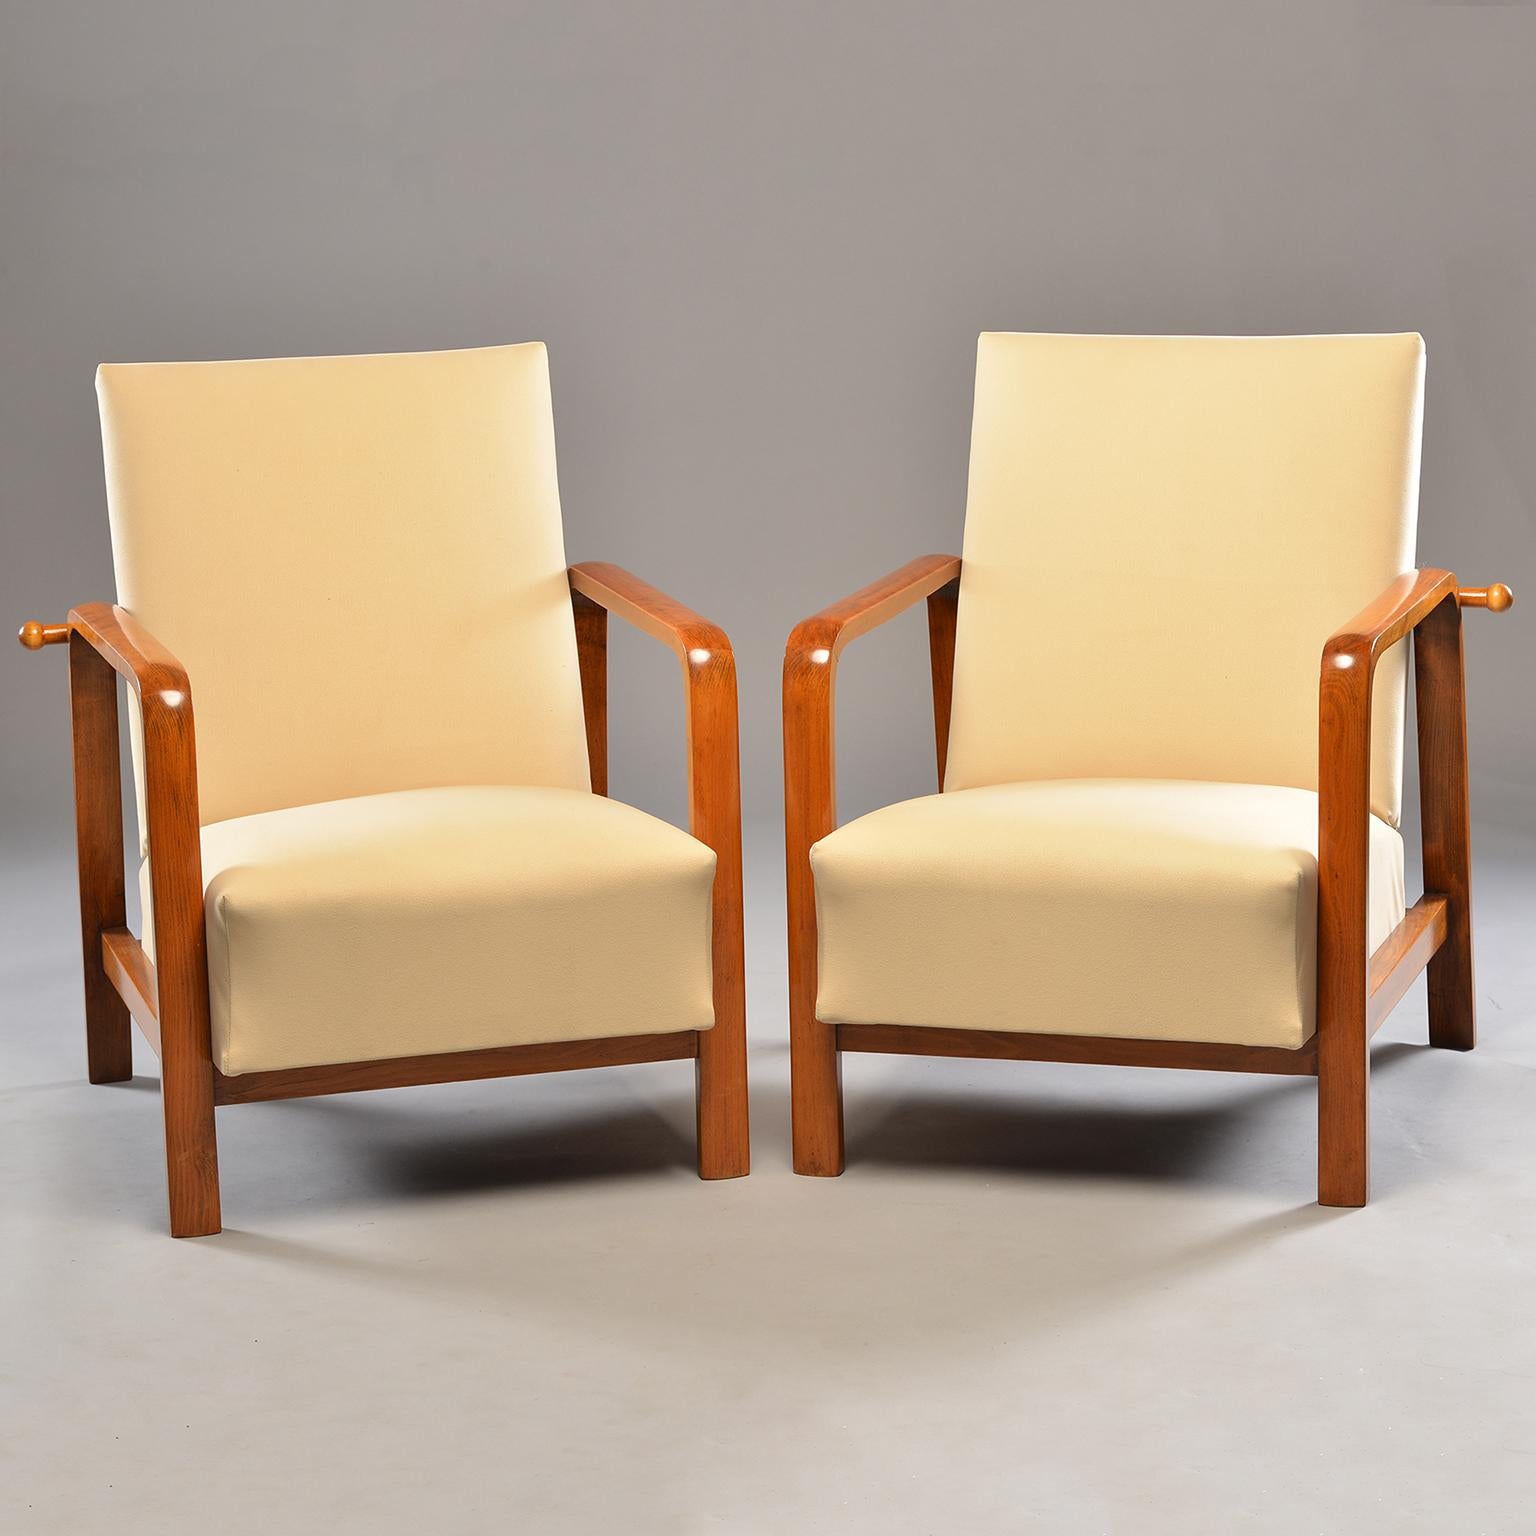 Pair of Italian reclining armchairs, circa 1930s. Chairs have polished palisander frames and updated cream colored moleskin upholstery. Adjustable wood bars in back allow chairs to recline. Arms are 24.5” high. Seats are 17.5” high. Seat depth is